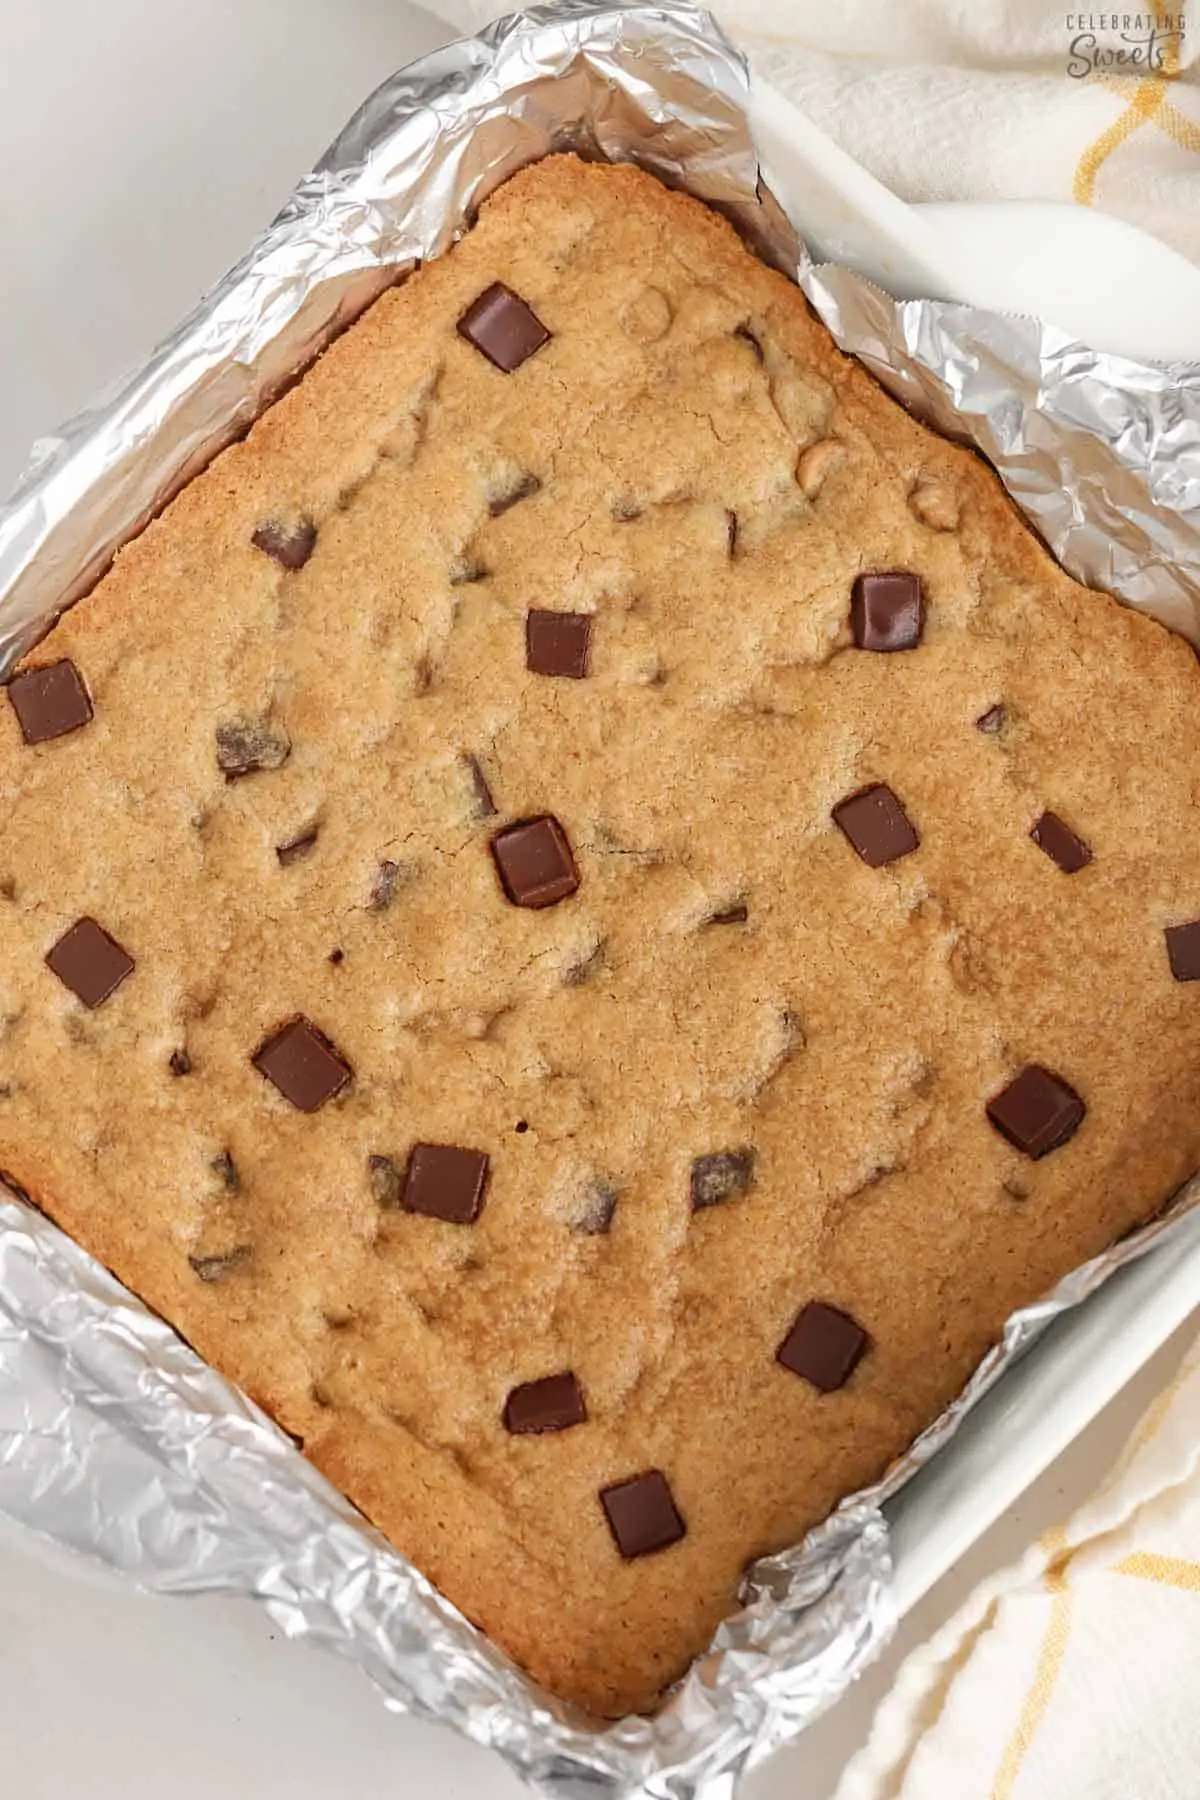 Blondies in a foil-lined pan.